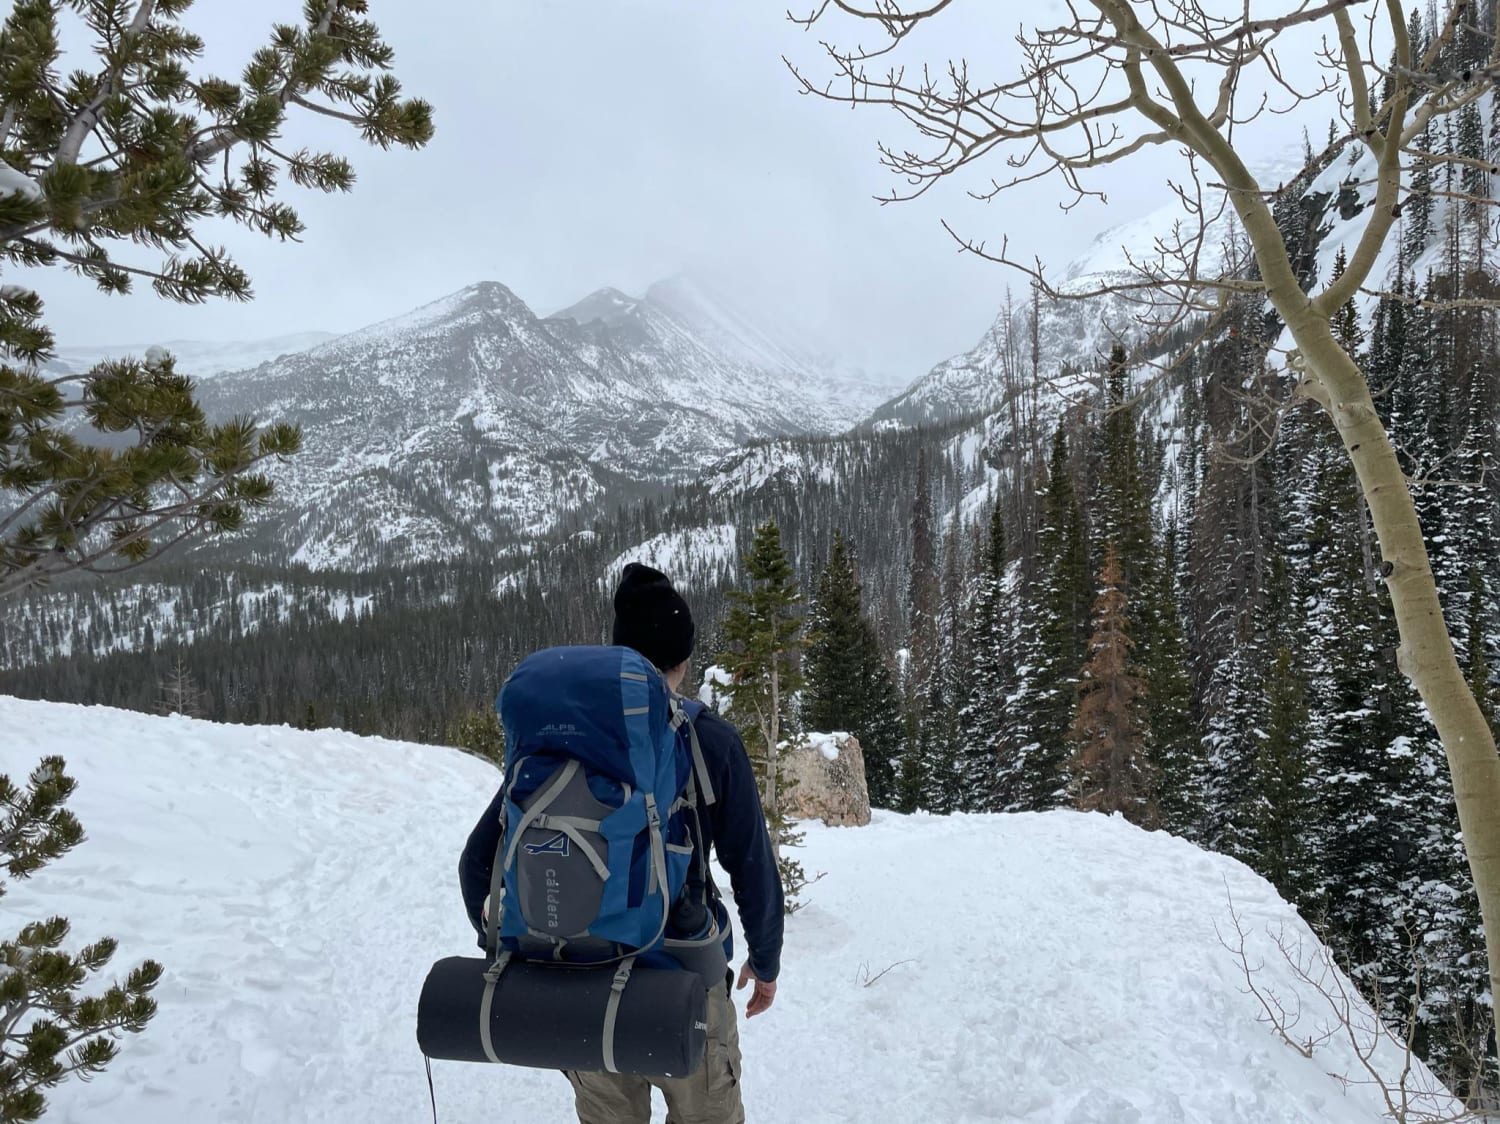 Rocky Mountain National Park, my spring break trip was met with an exorbitant amount of snow:)